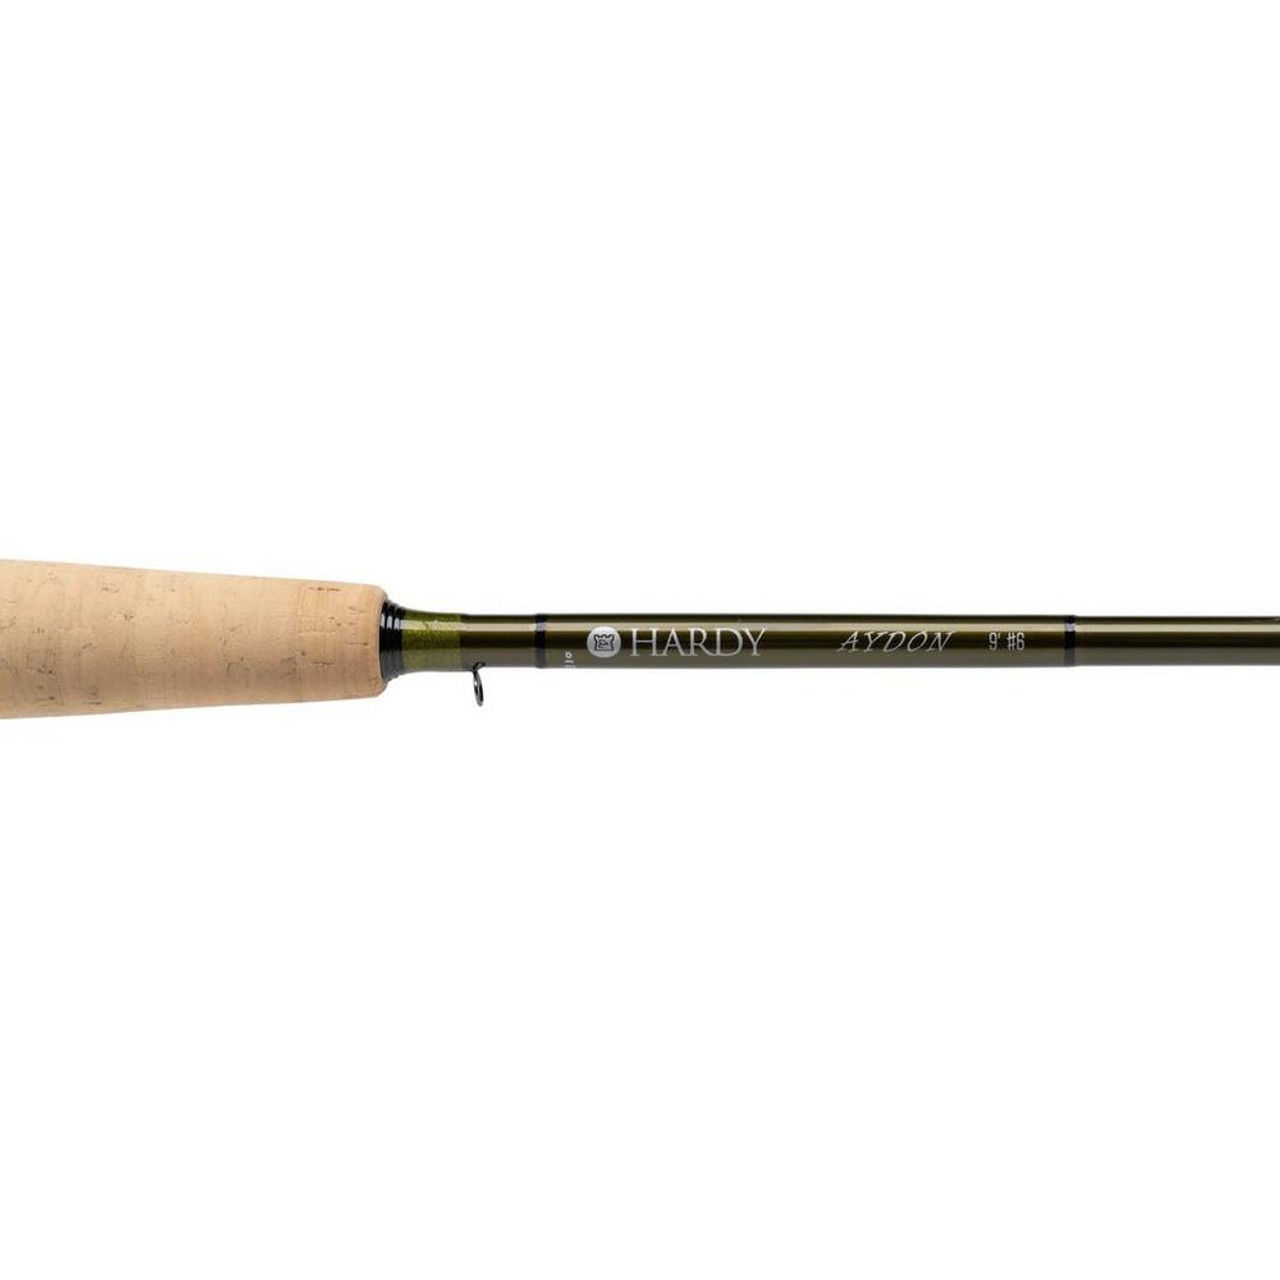 Hardy Aydon Travel Fly Rod 5wt 6pc58216 - Gordy & Sons Outfitters